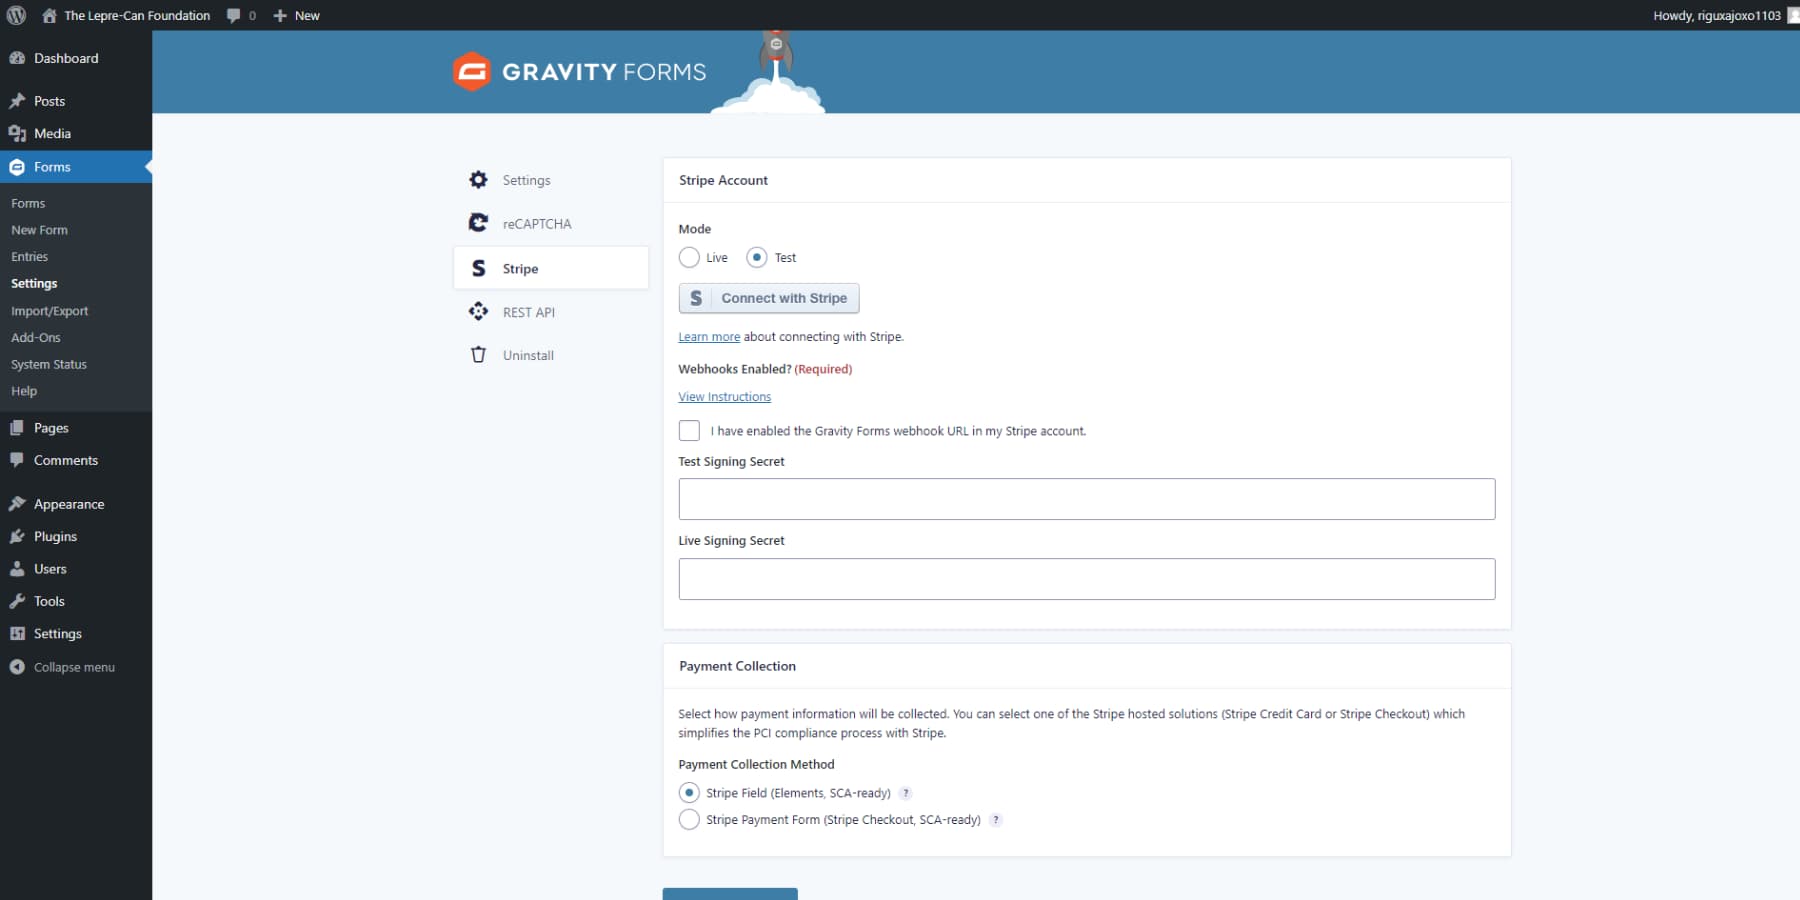 A screenshot of Gravity Forms' payments user interface